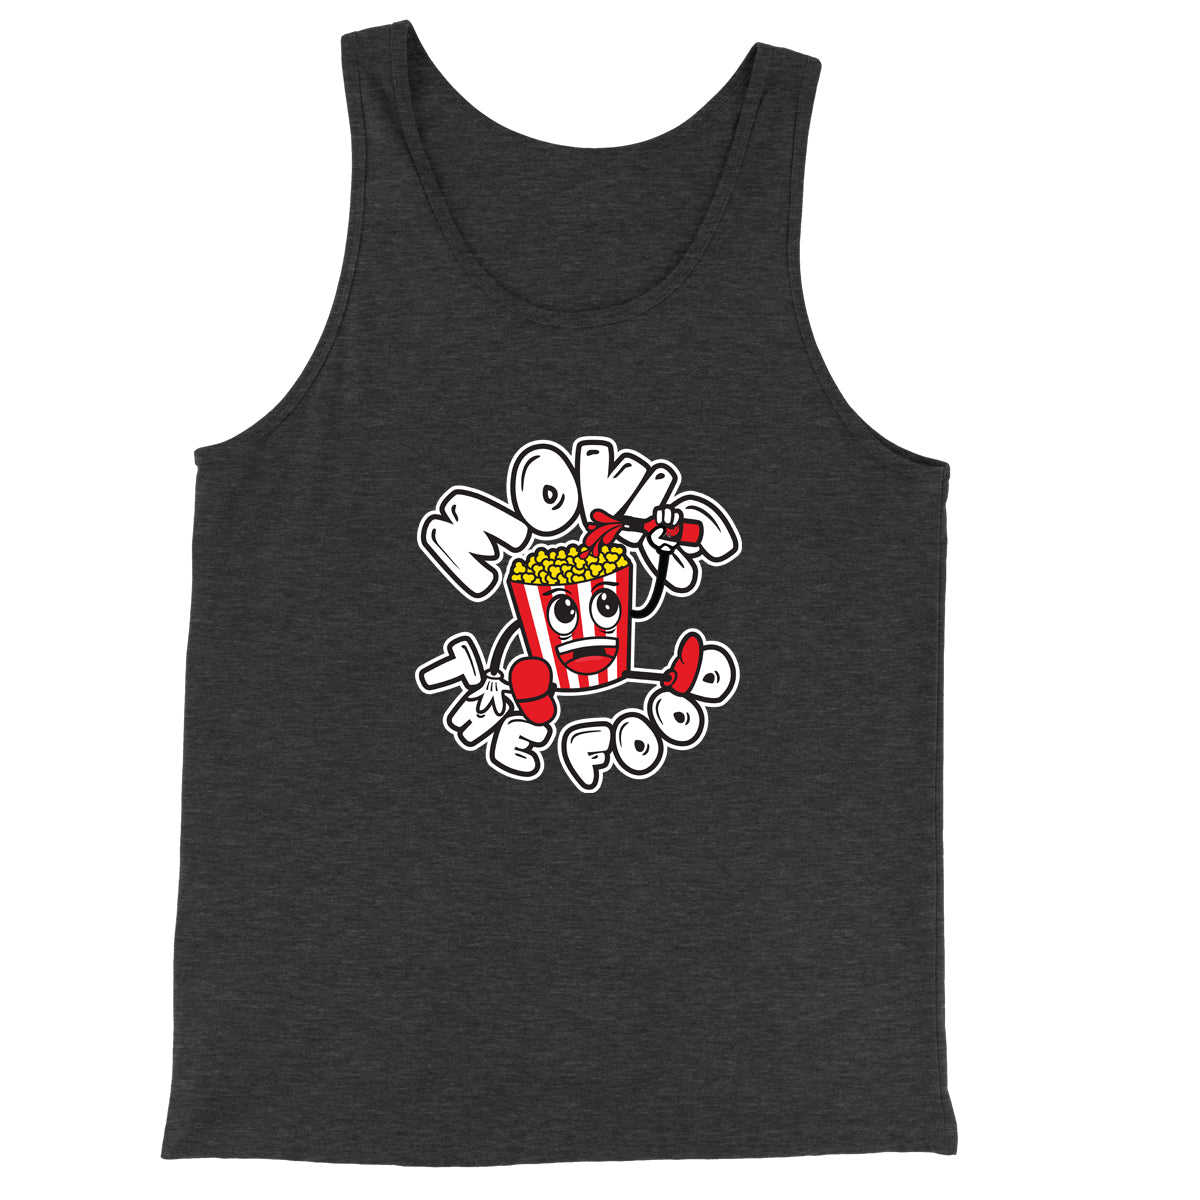 Movie The Food - Round Logo Tank Top - Charcoal-black Triblend